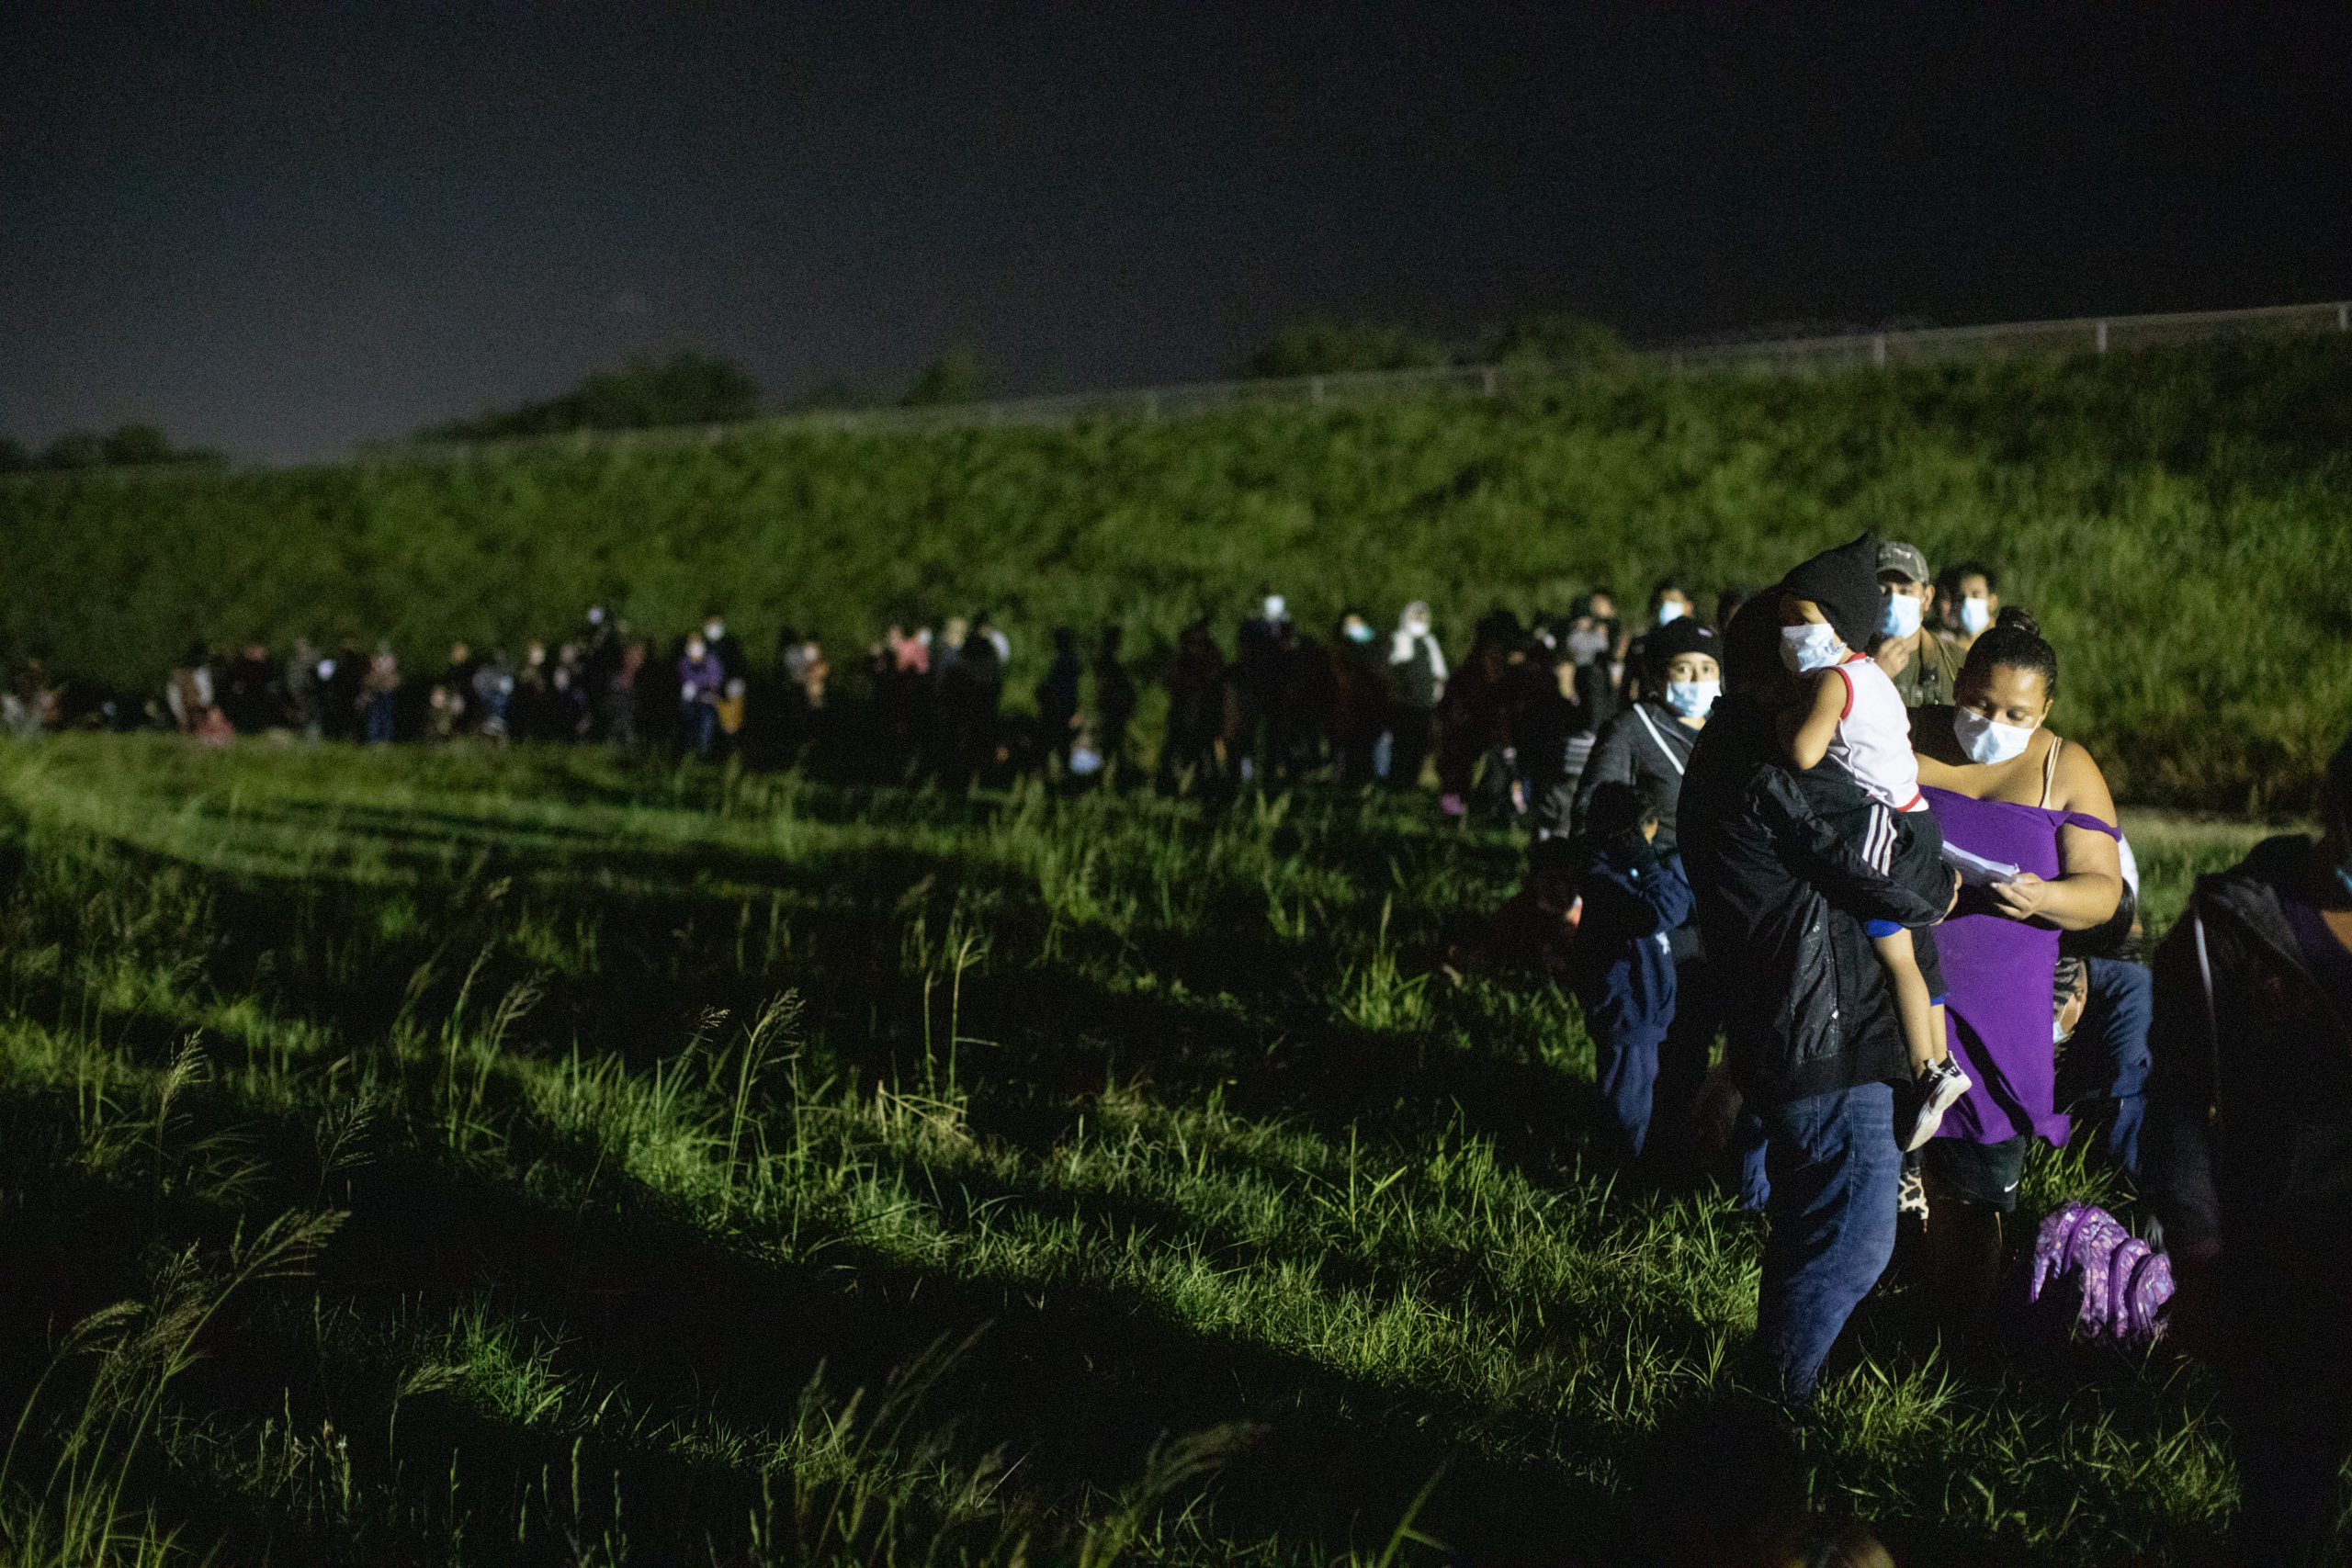 Hundreds of migrants waited in a line to be processed by four Customs and Border Protection agents ​near the Hidalgo Point of Entry on August 9, 2021. (Kaylee Greenlee - Daily Caller News Foundation